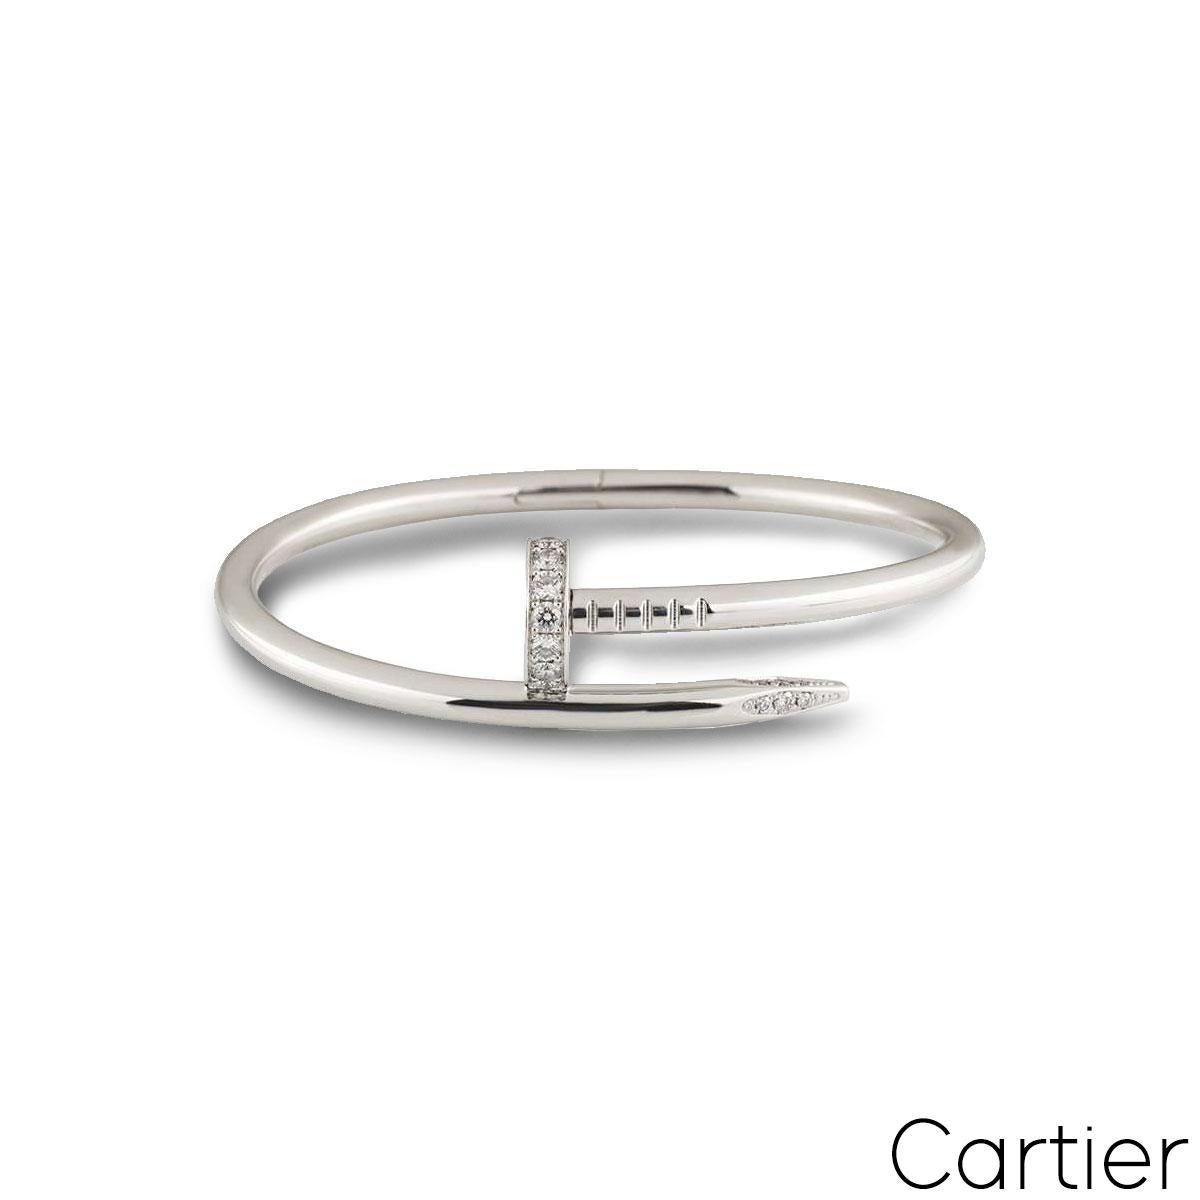 An 18k white gold and diamond bracelet by Cartier from the Juste un Clou collection. The bangle is in the style of a nail and has 27 round brilliant cut diamonds pave set in the head and tip, totalling 0.54ct. A size 15 and featuring the old style